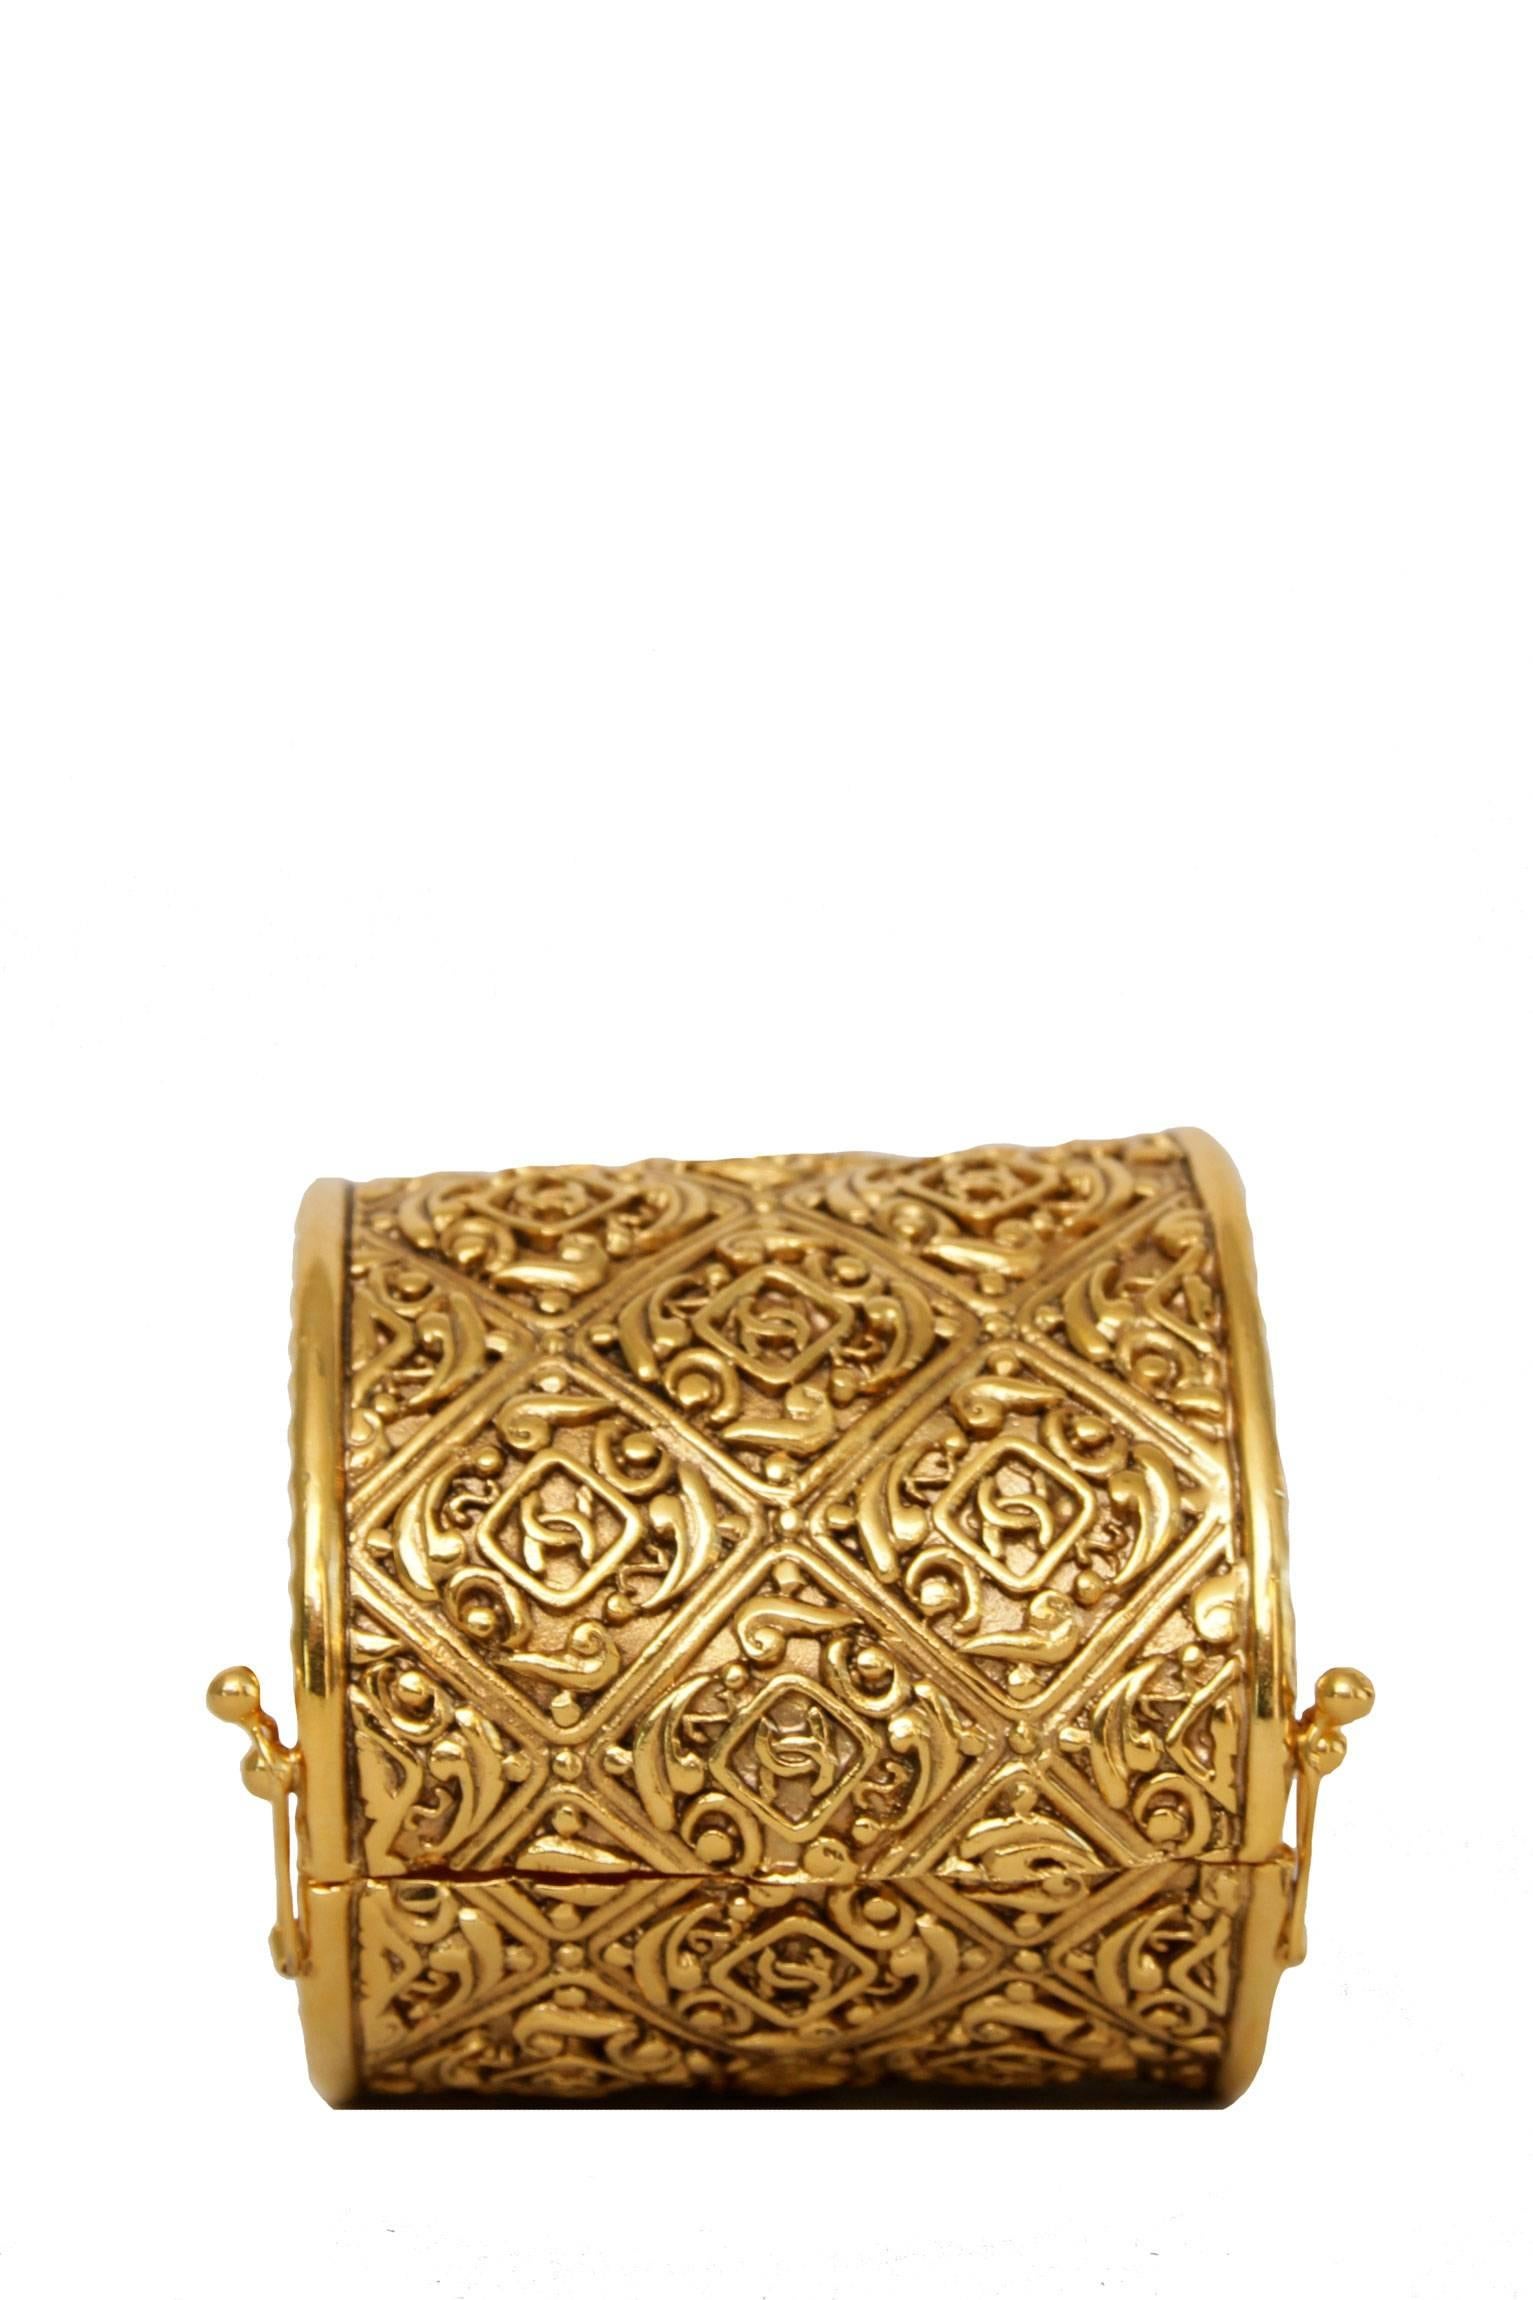 An extravagant 1980s gold-toned Chanel Cuff with intricate engravings set in a lattice grid. The engravings are completed with small Chanel double 'CC' logos. The wide cuff is fastened by a safety clasp on both sides.

The cuff is stamped: Chanel,